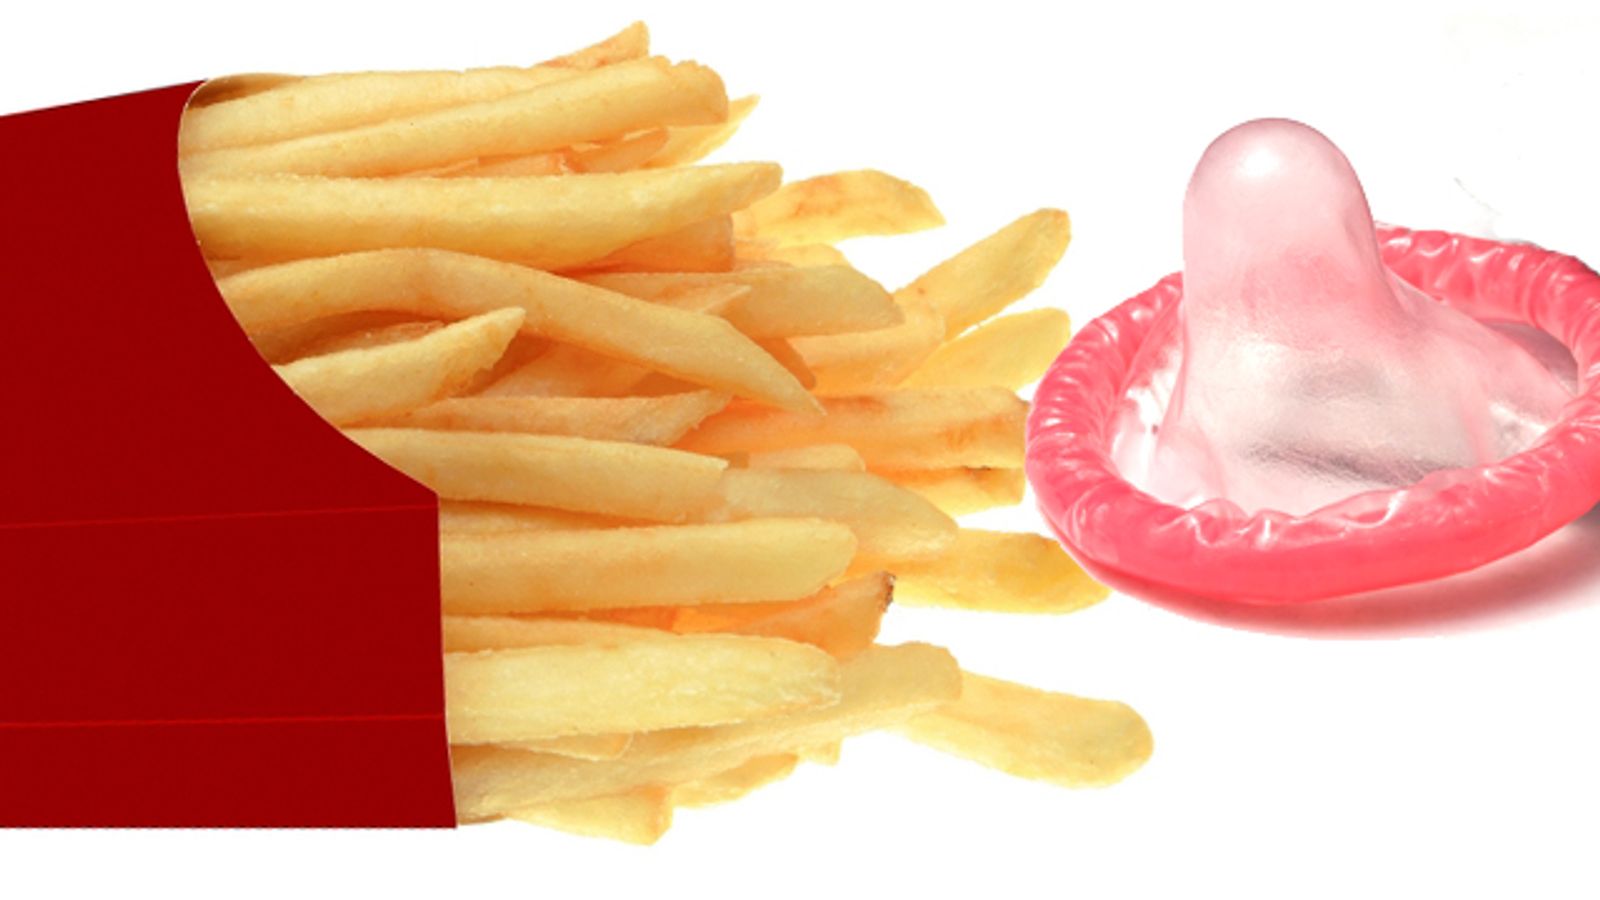 Condom Gives New Meaning to Happy Meal